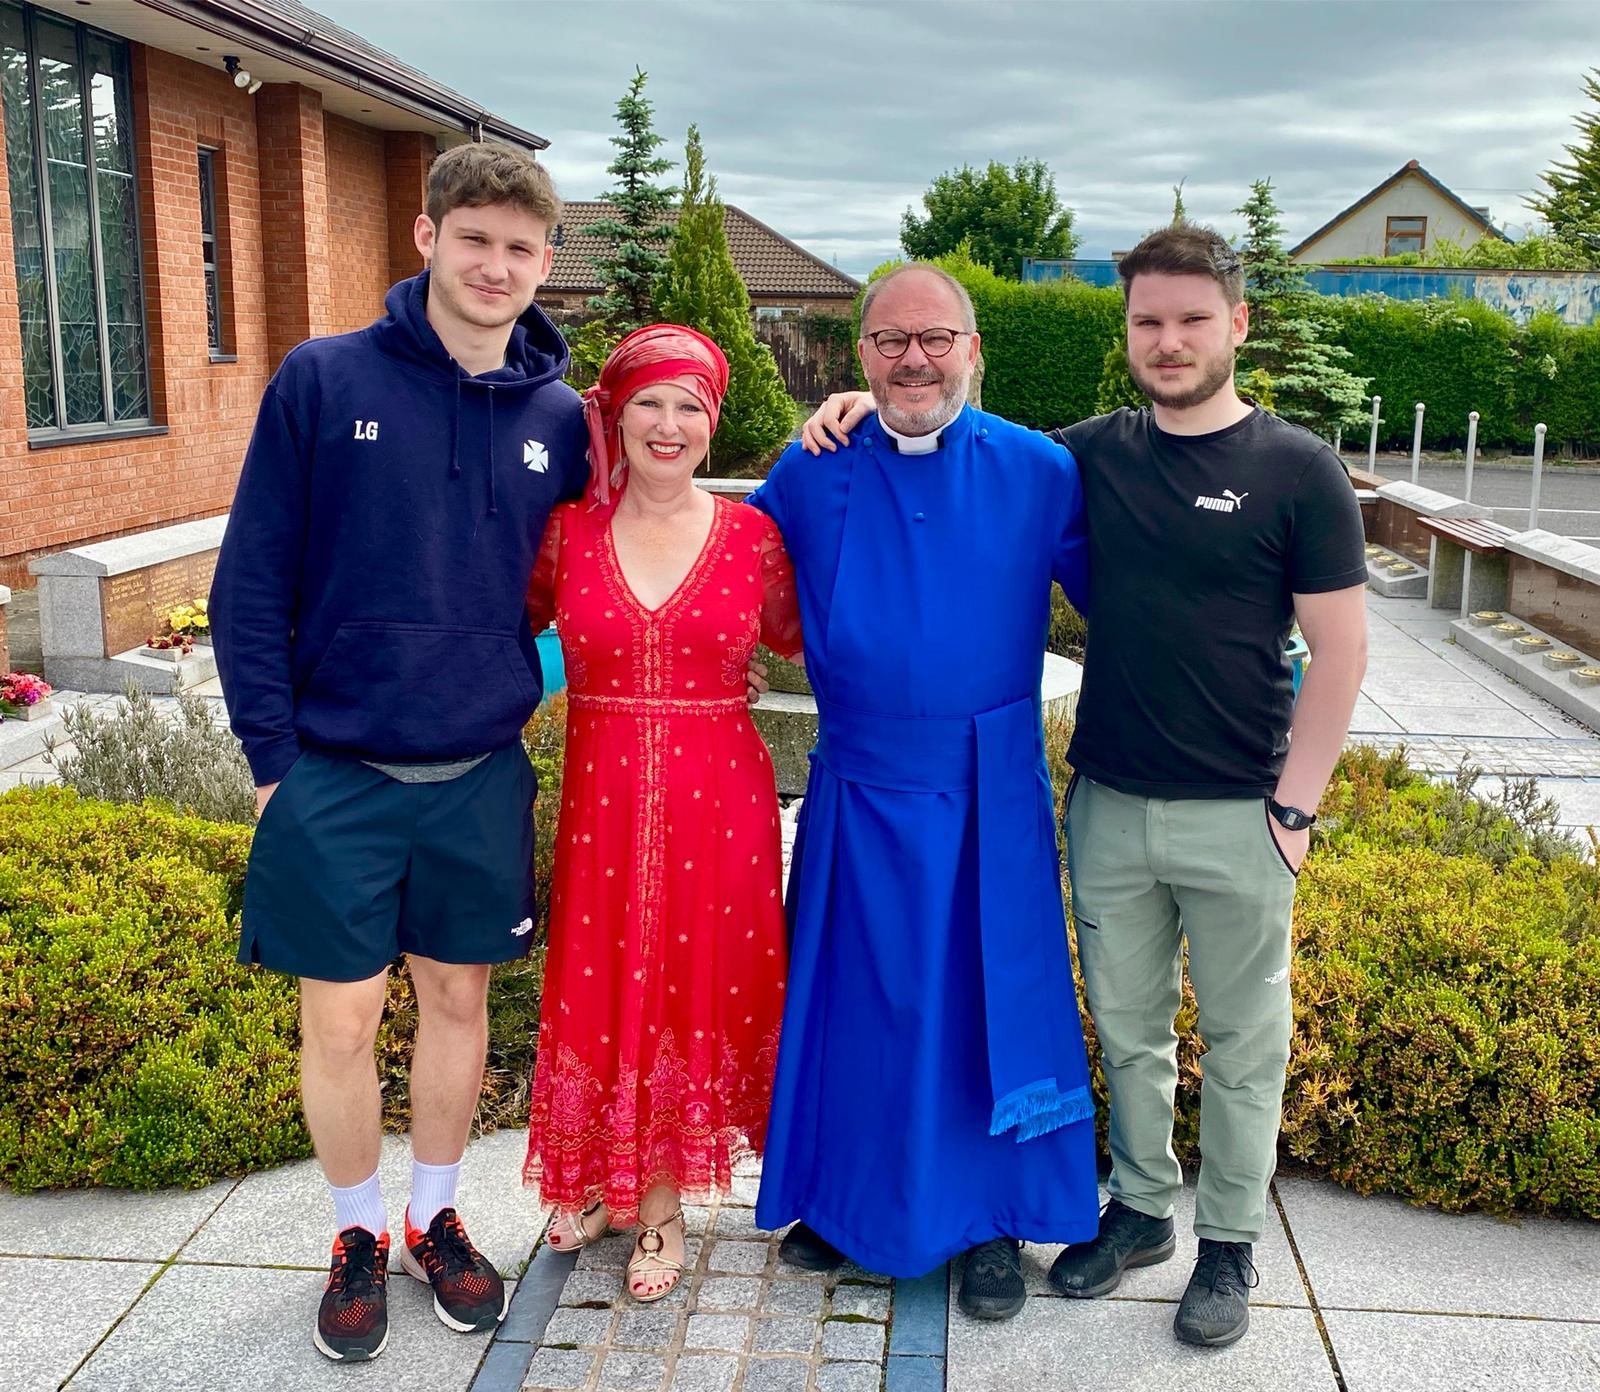 The Rev Canon Kevin Graham, rector of St Barthlomew's Parish Church, Stranmillis, Diocese of Connor, his wife Cheryl, and their sons Jamie and Luke, pictured after Kevin and Cheryl renewed their wedding vows in St Colman's Parish Church, Kilroot, last Saturday, during a marathon walk to raise funds for Macmillan Cancer Support.